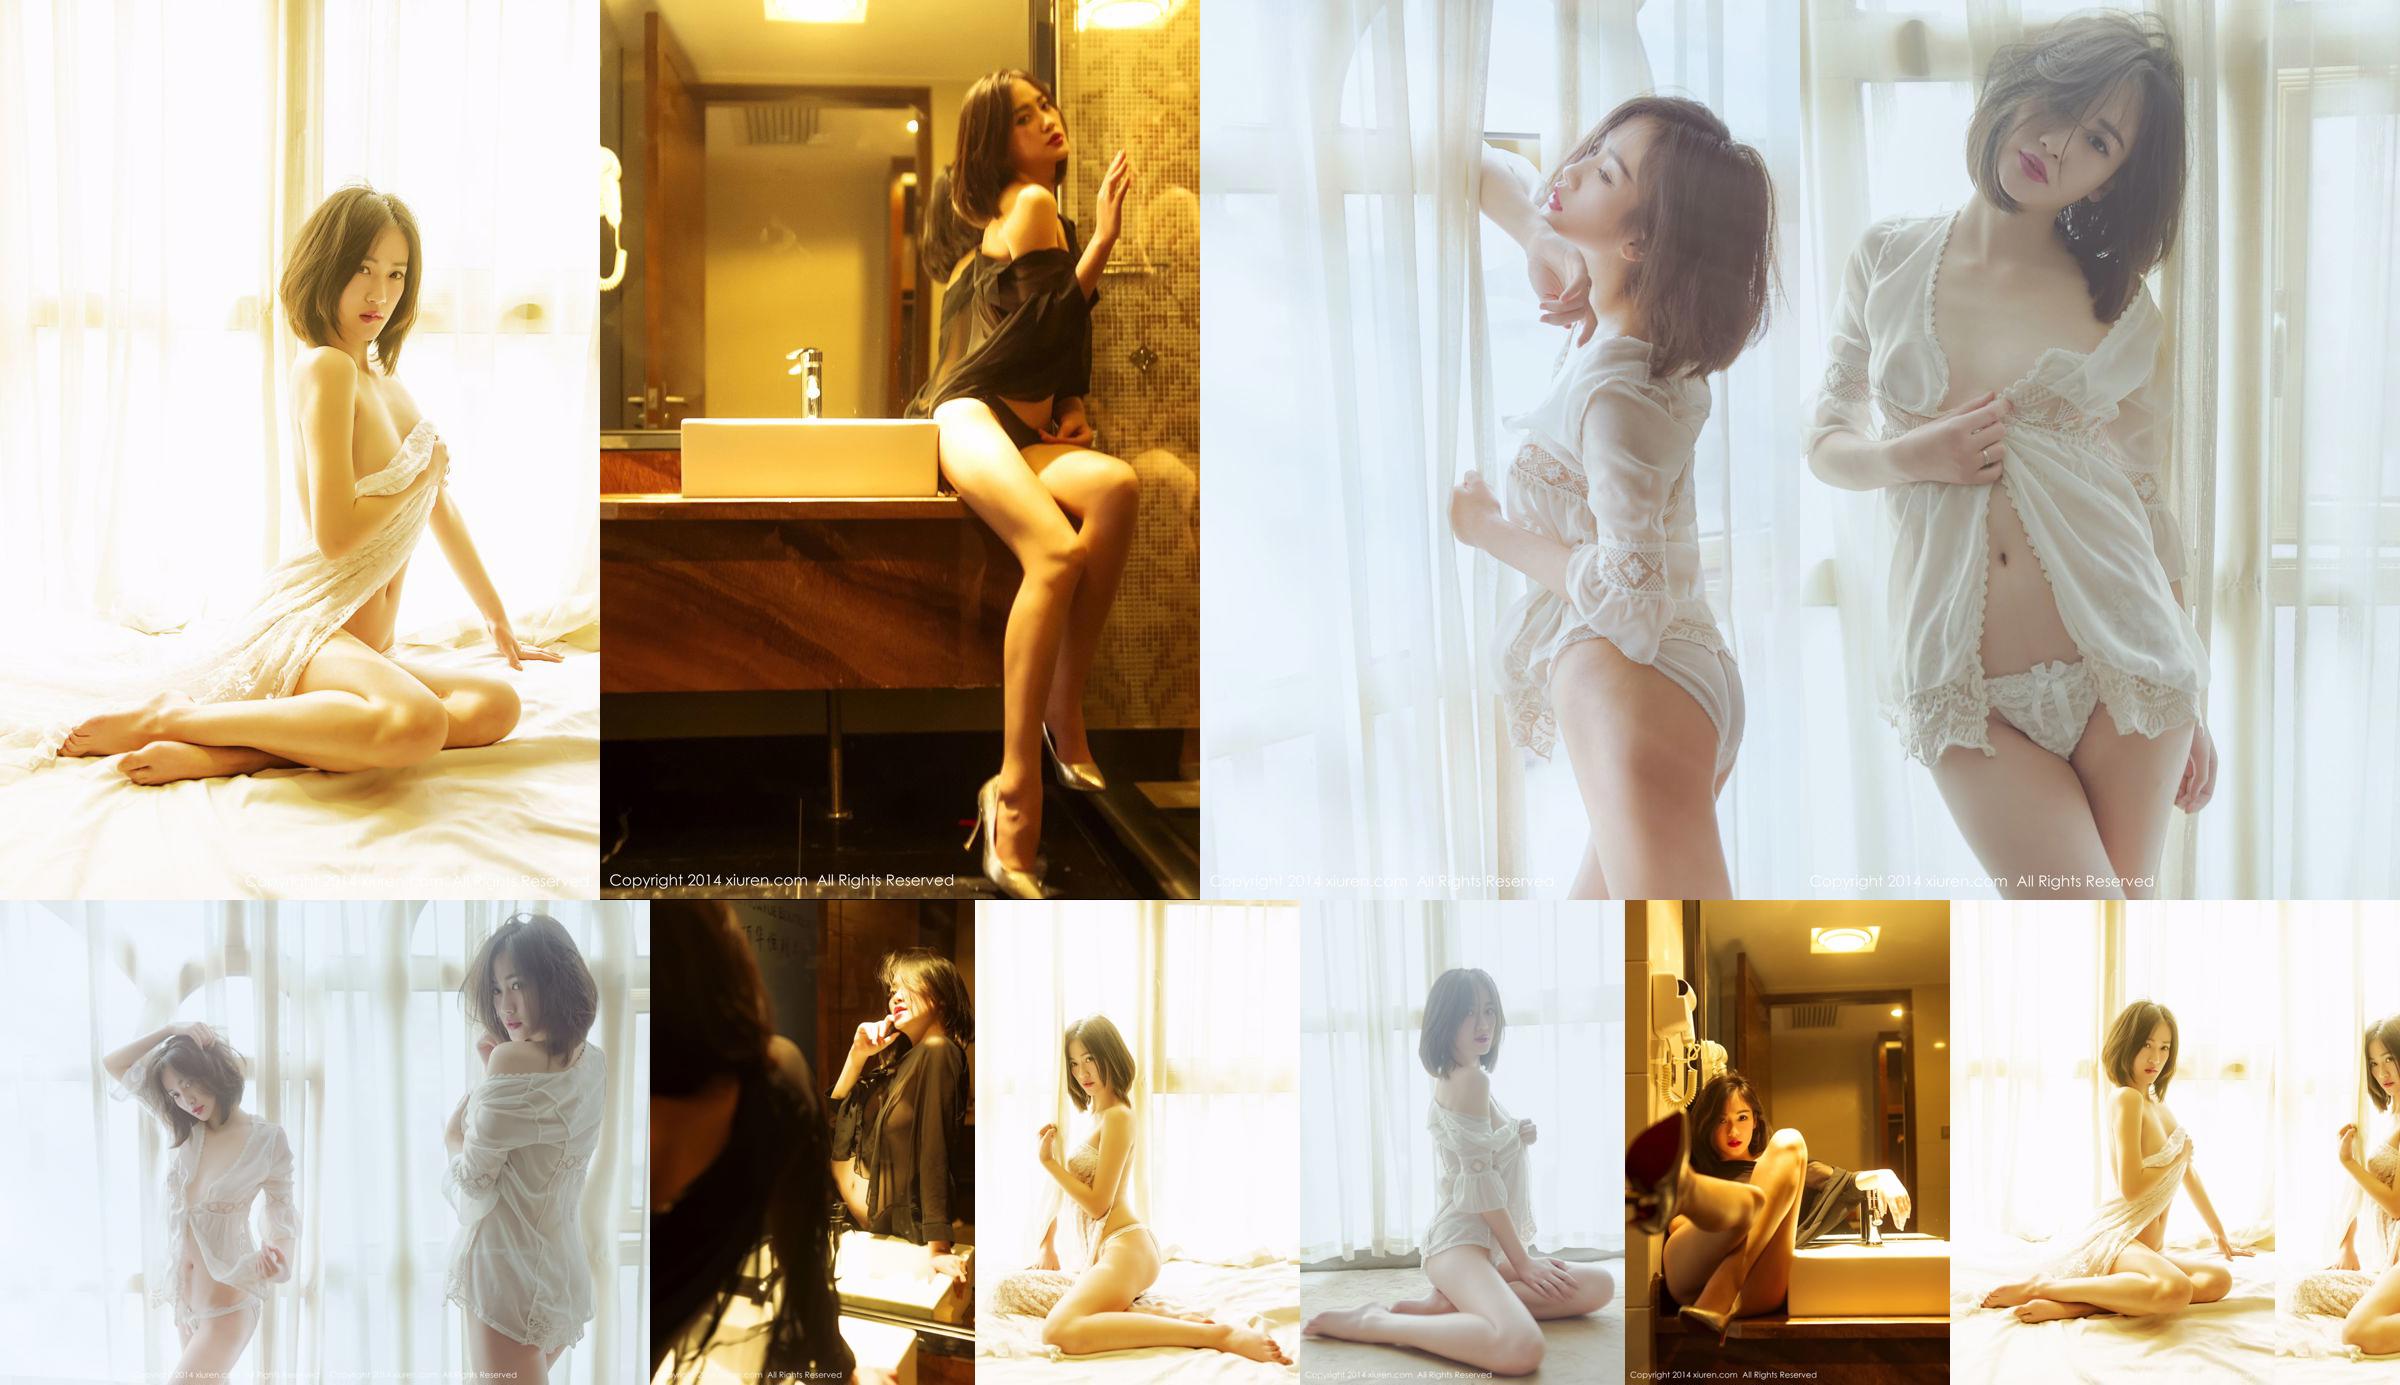 [TheBlackAlley] Sherly Tang underwear seduces the human body No.02a393 Page 5